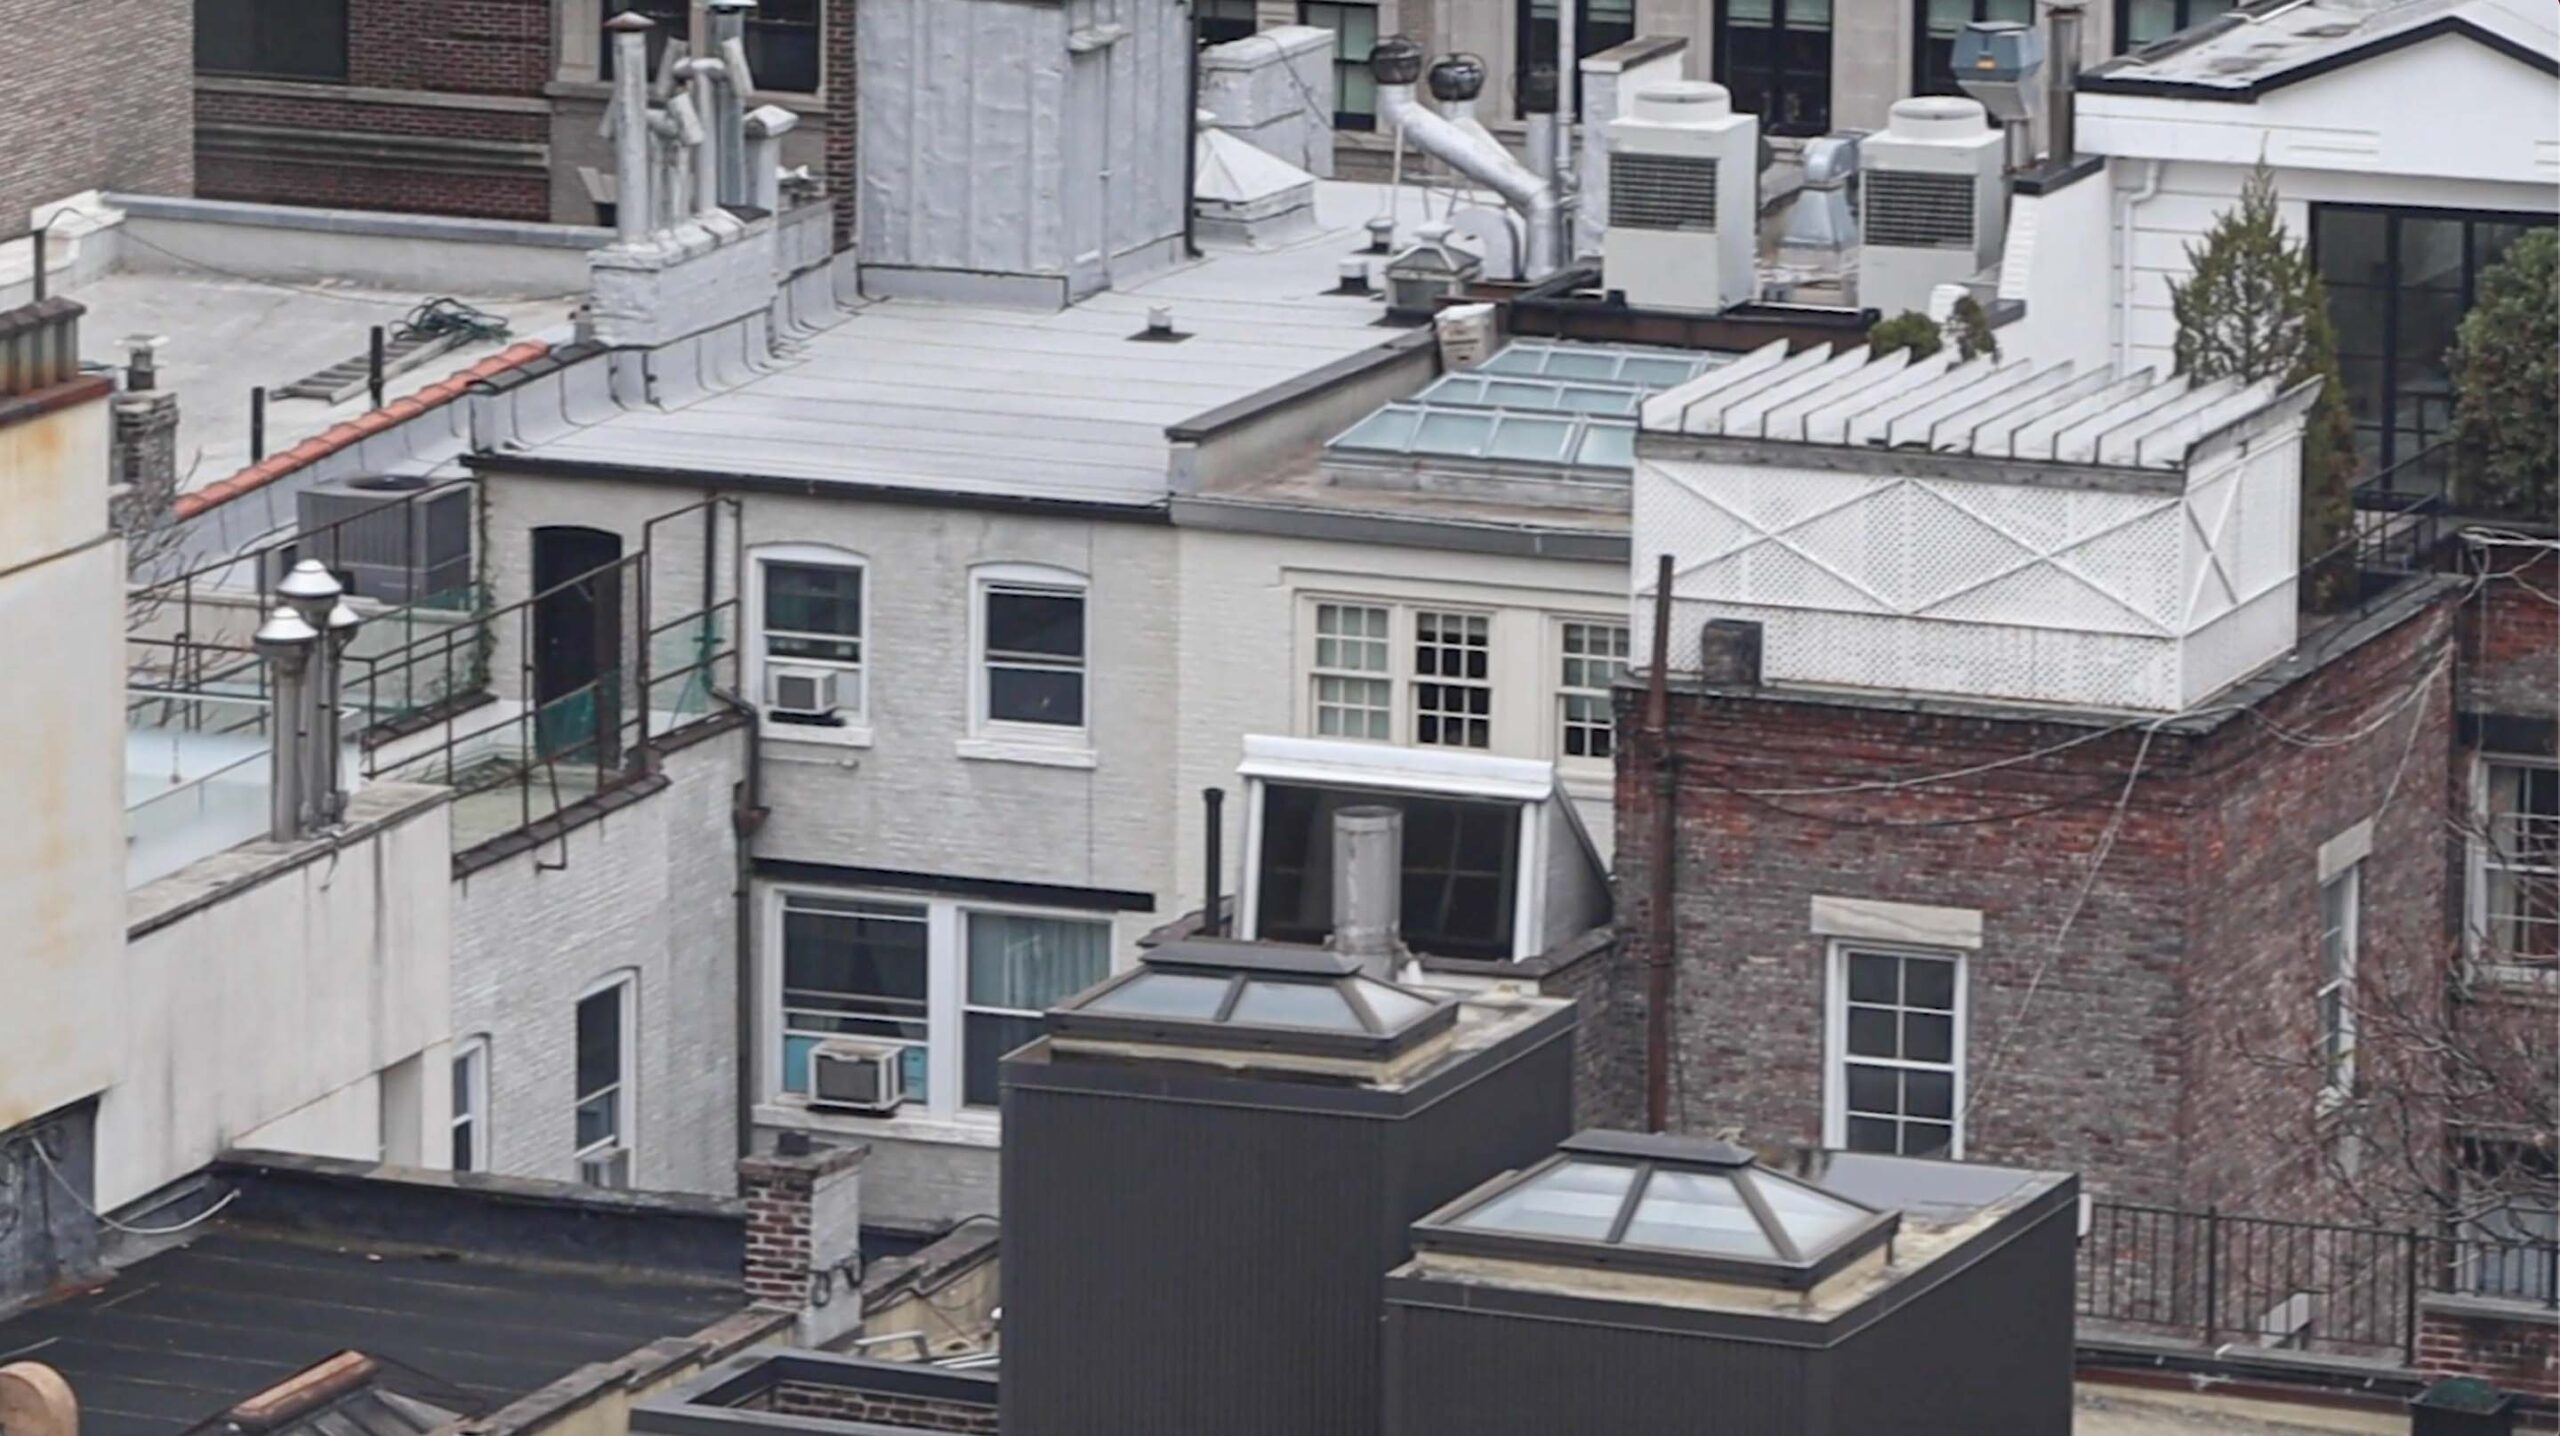 Rooftops on the Upper East Side. 